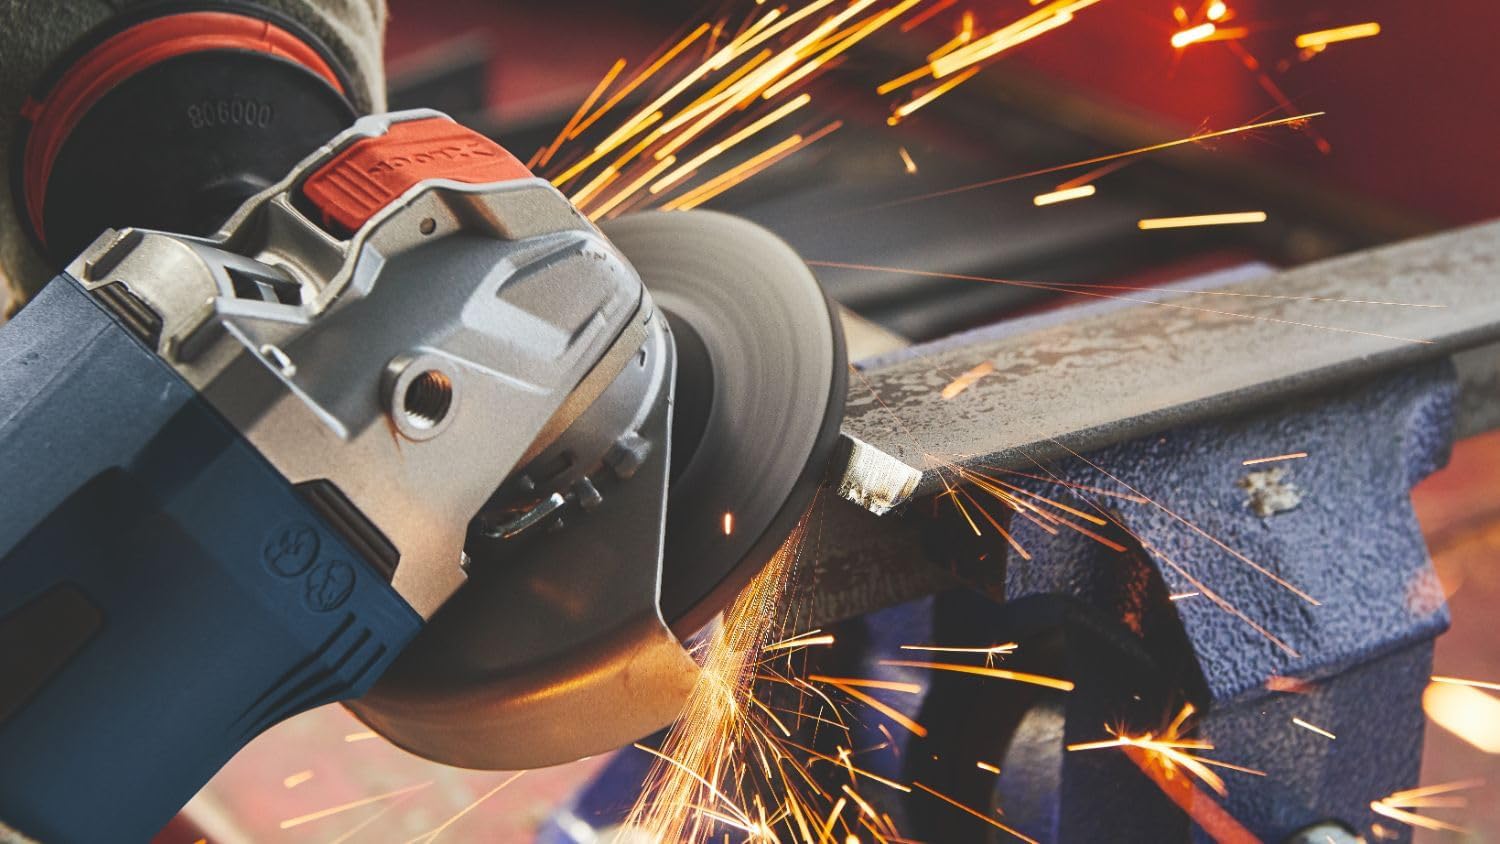 How To Change The Head On An Angle Grinder